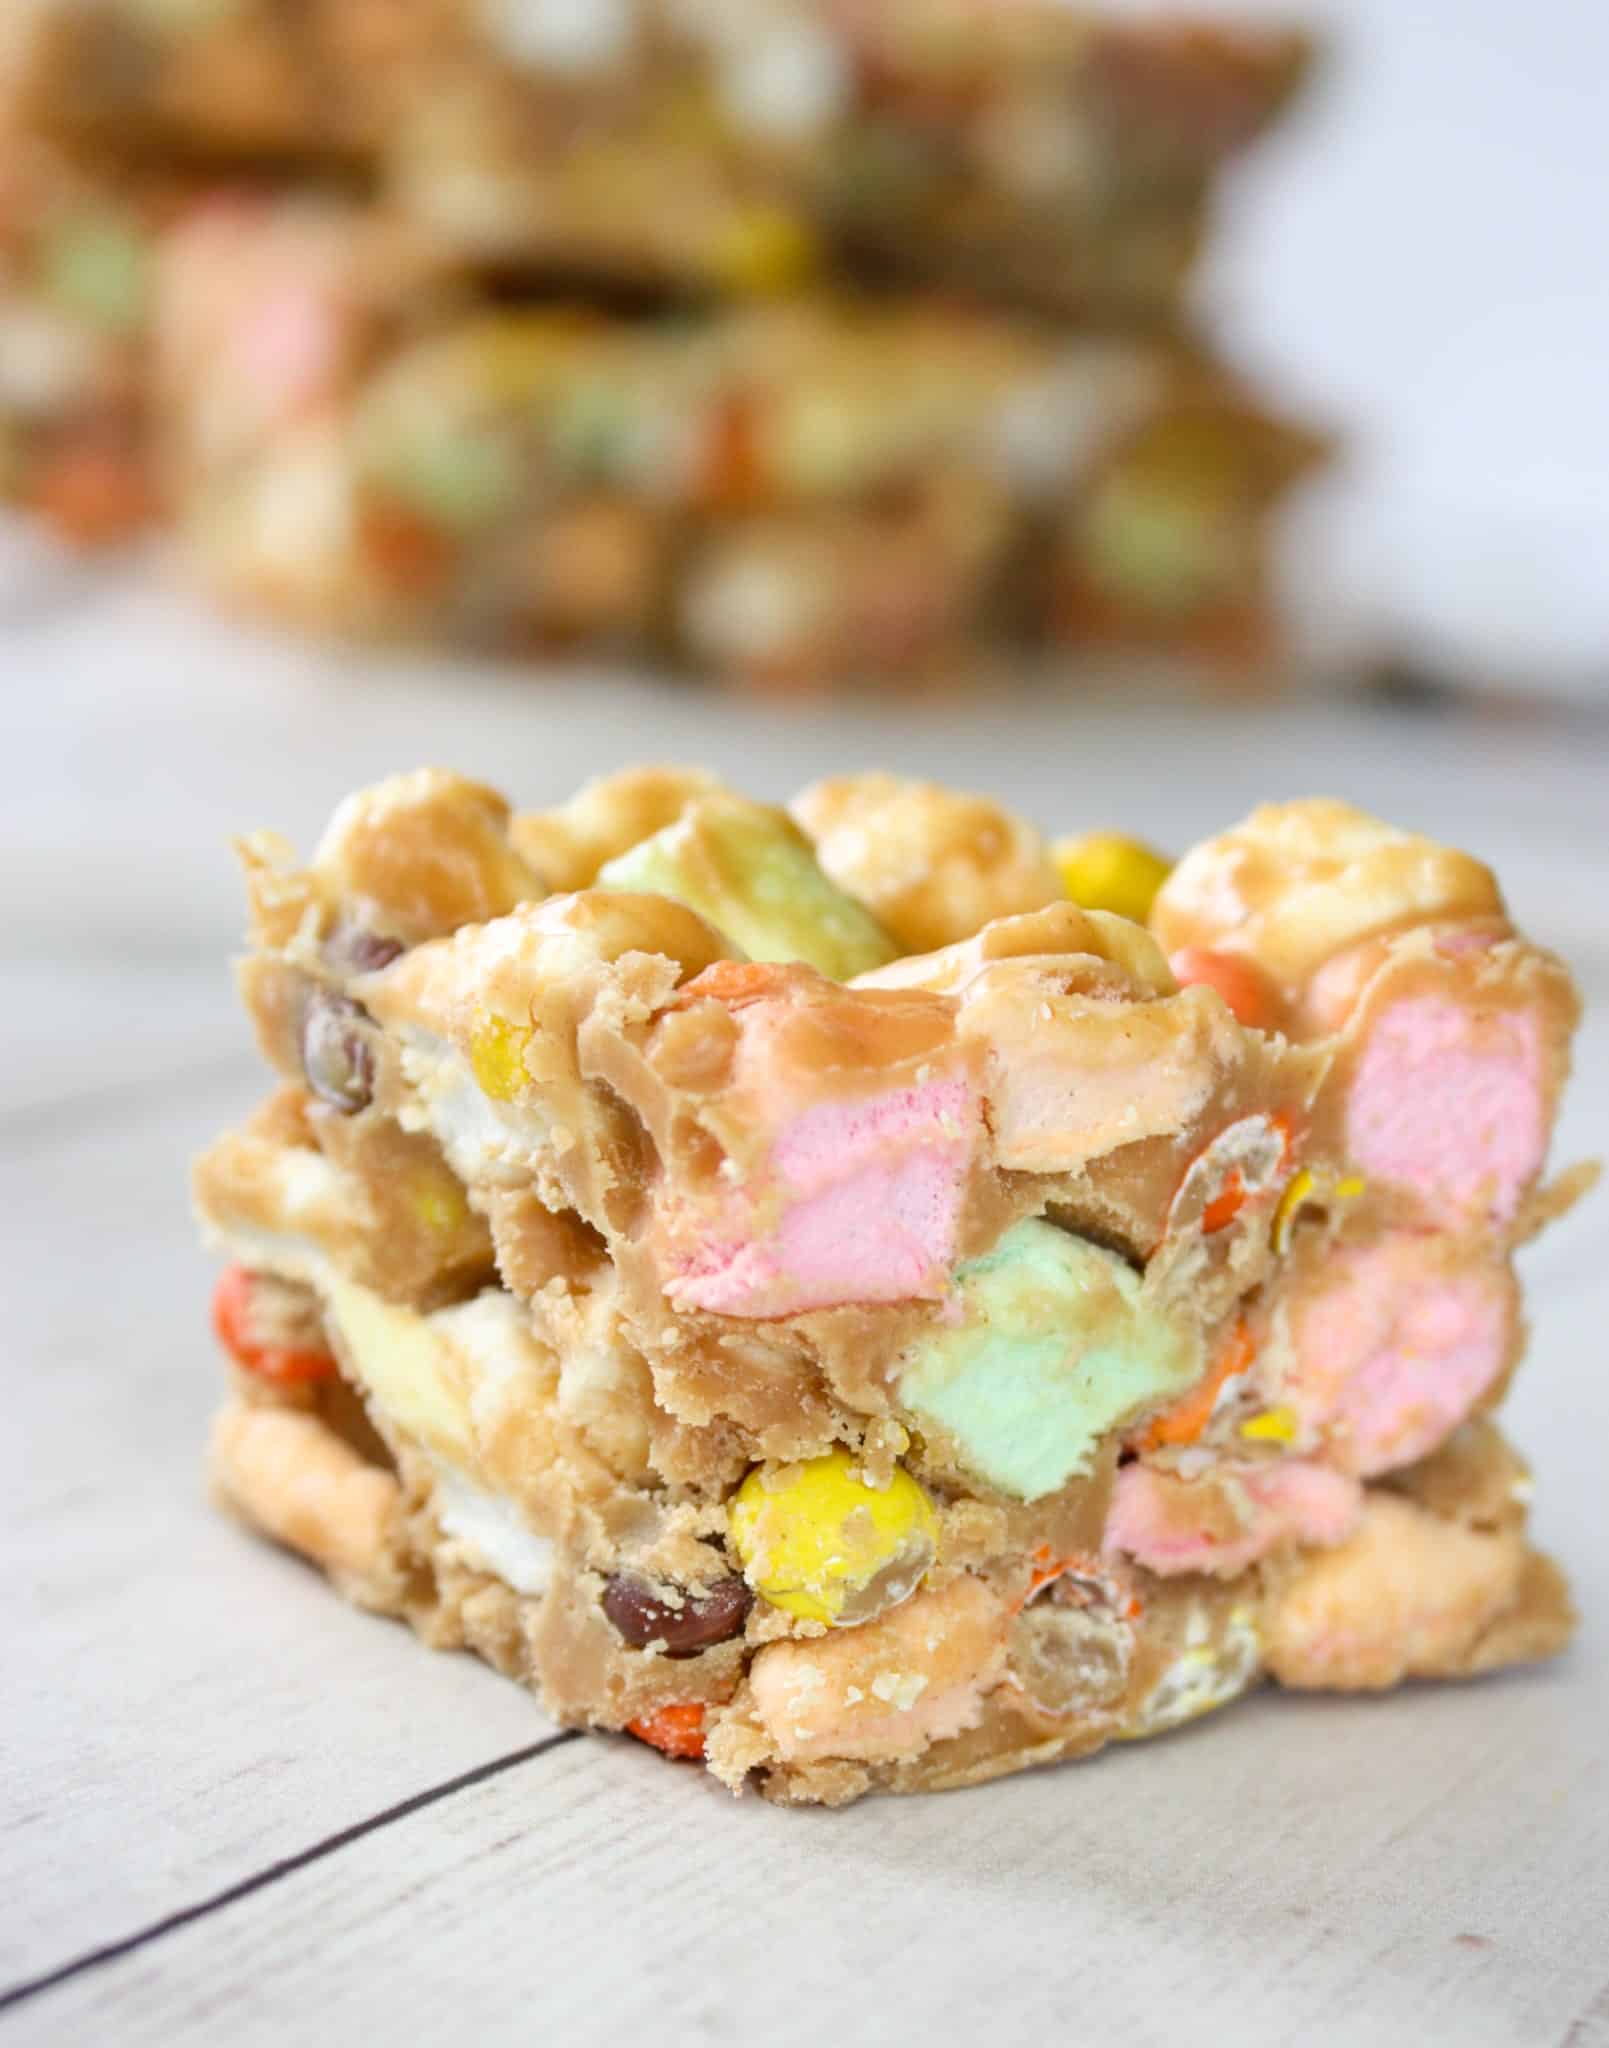 Peanut Butter Marshmallow Squares are a tasty, no bake dessert recipe that is a popular choice for all ages and occasions.